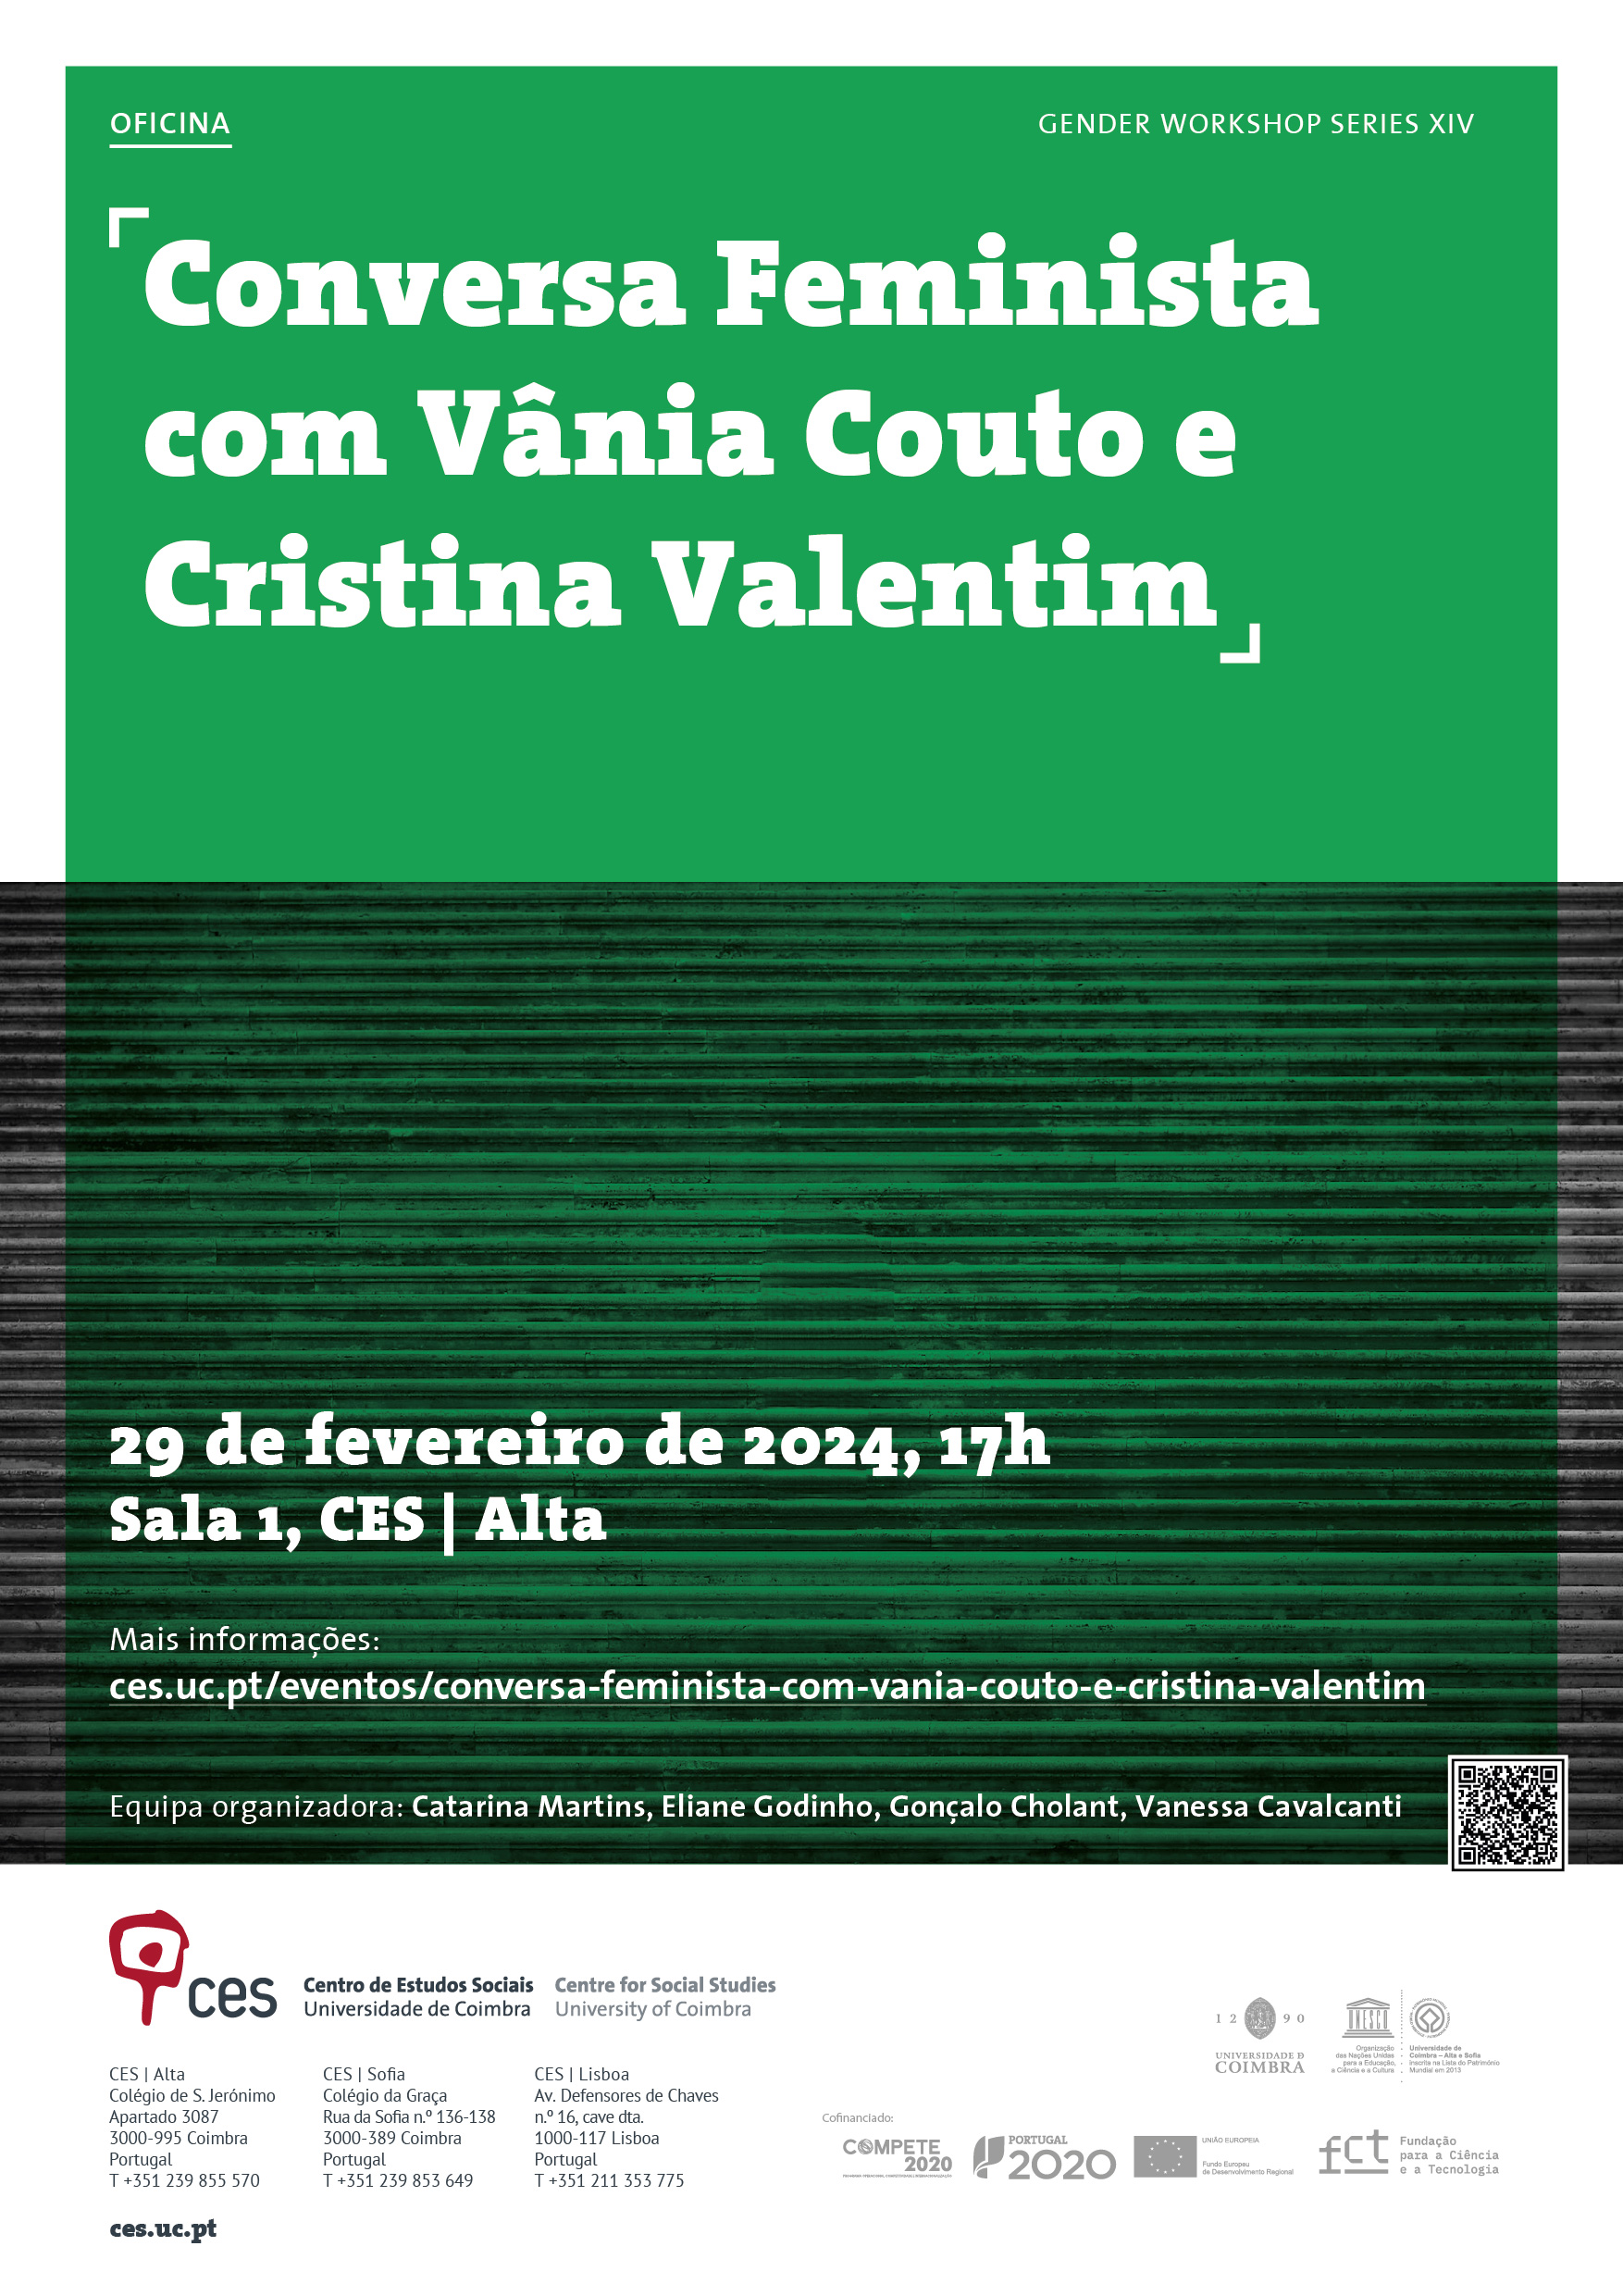 Feminist talks with Vânia Couto and Cristina Valentim<span id="edit_44348"><script>$(function() { $('#edit_44348').load( "/myces/user/editobj.php?tipo=evento&id=44348" ); });</script></span>